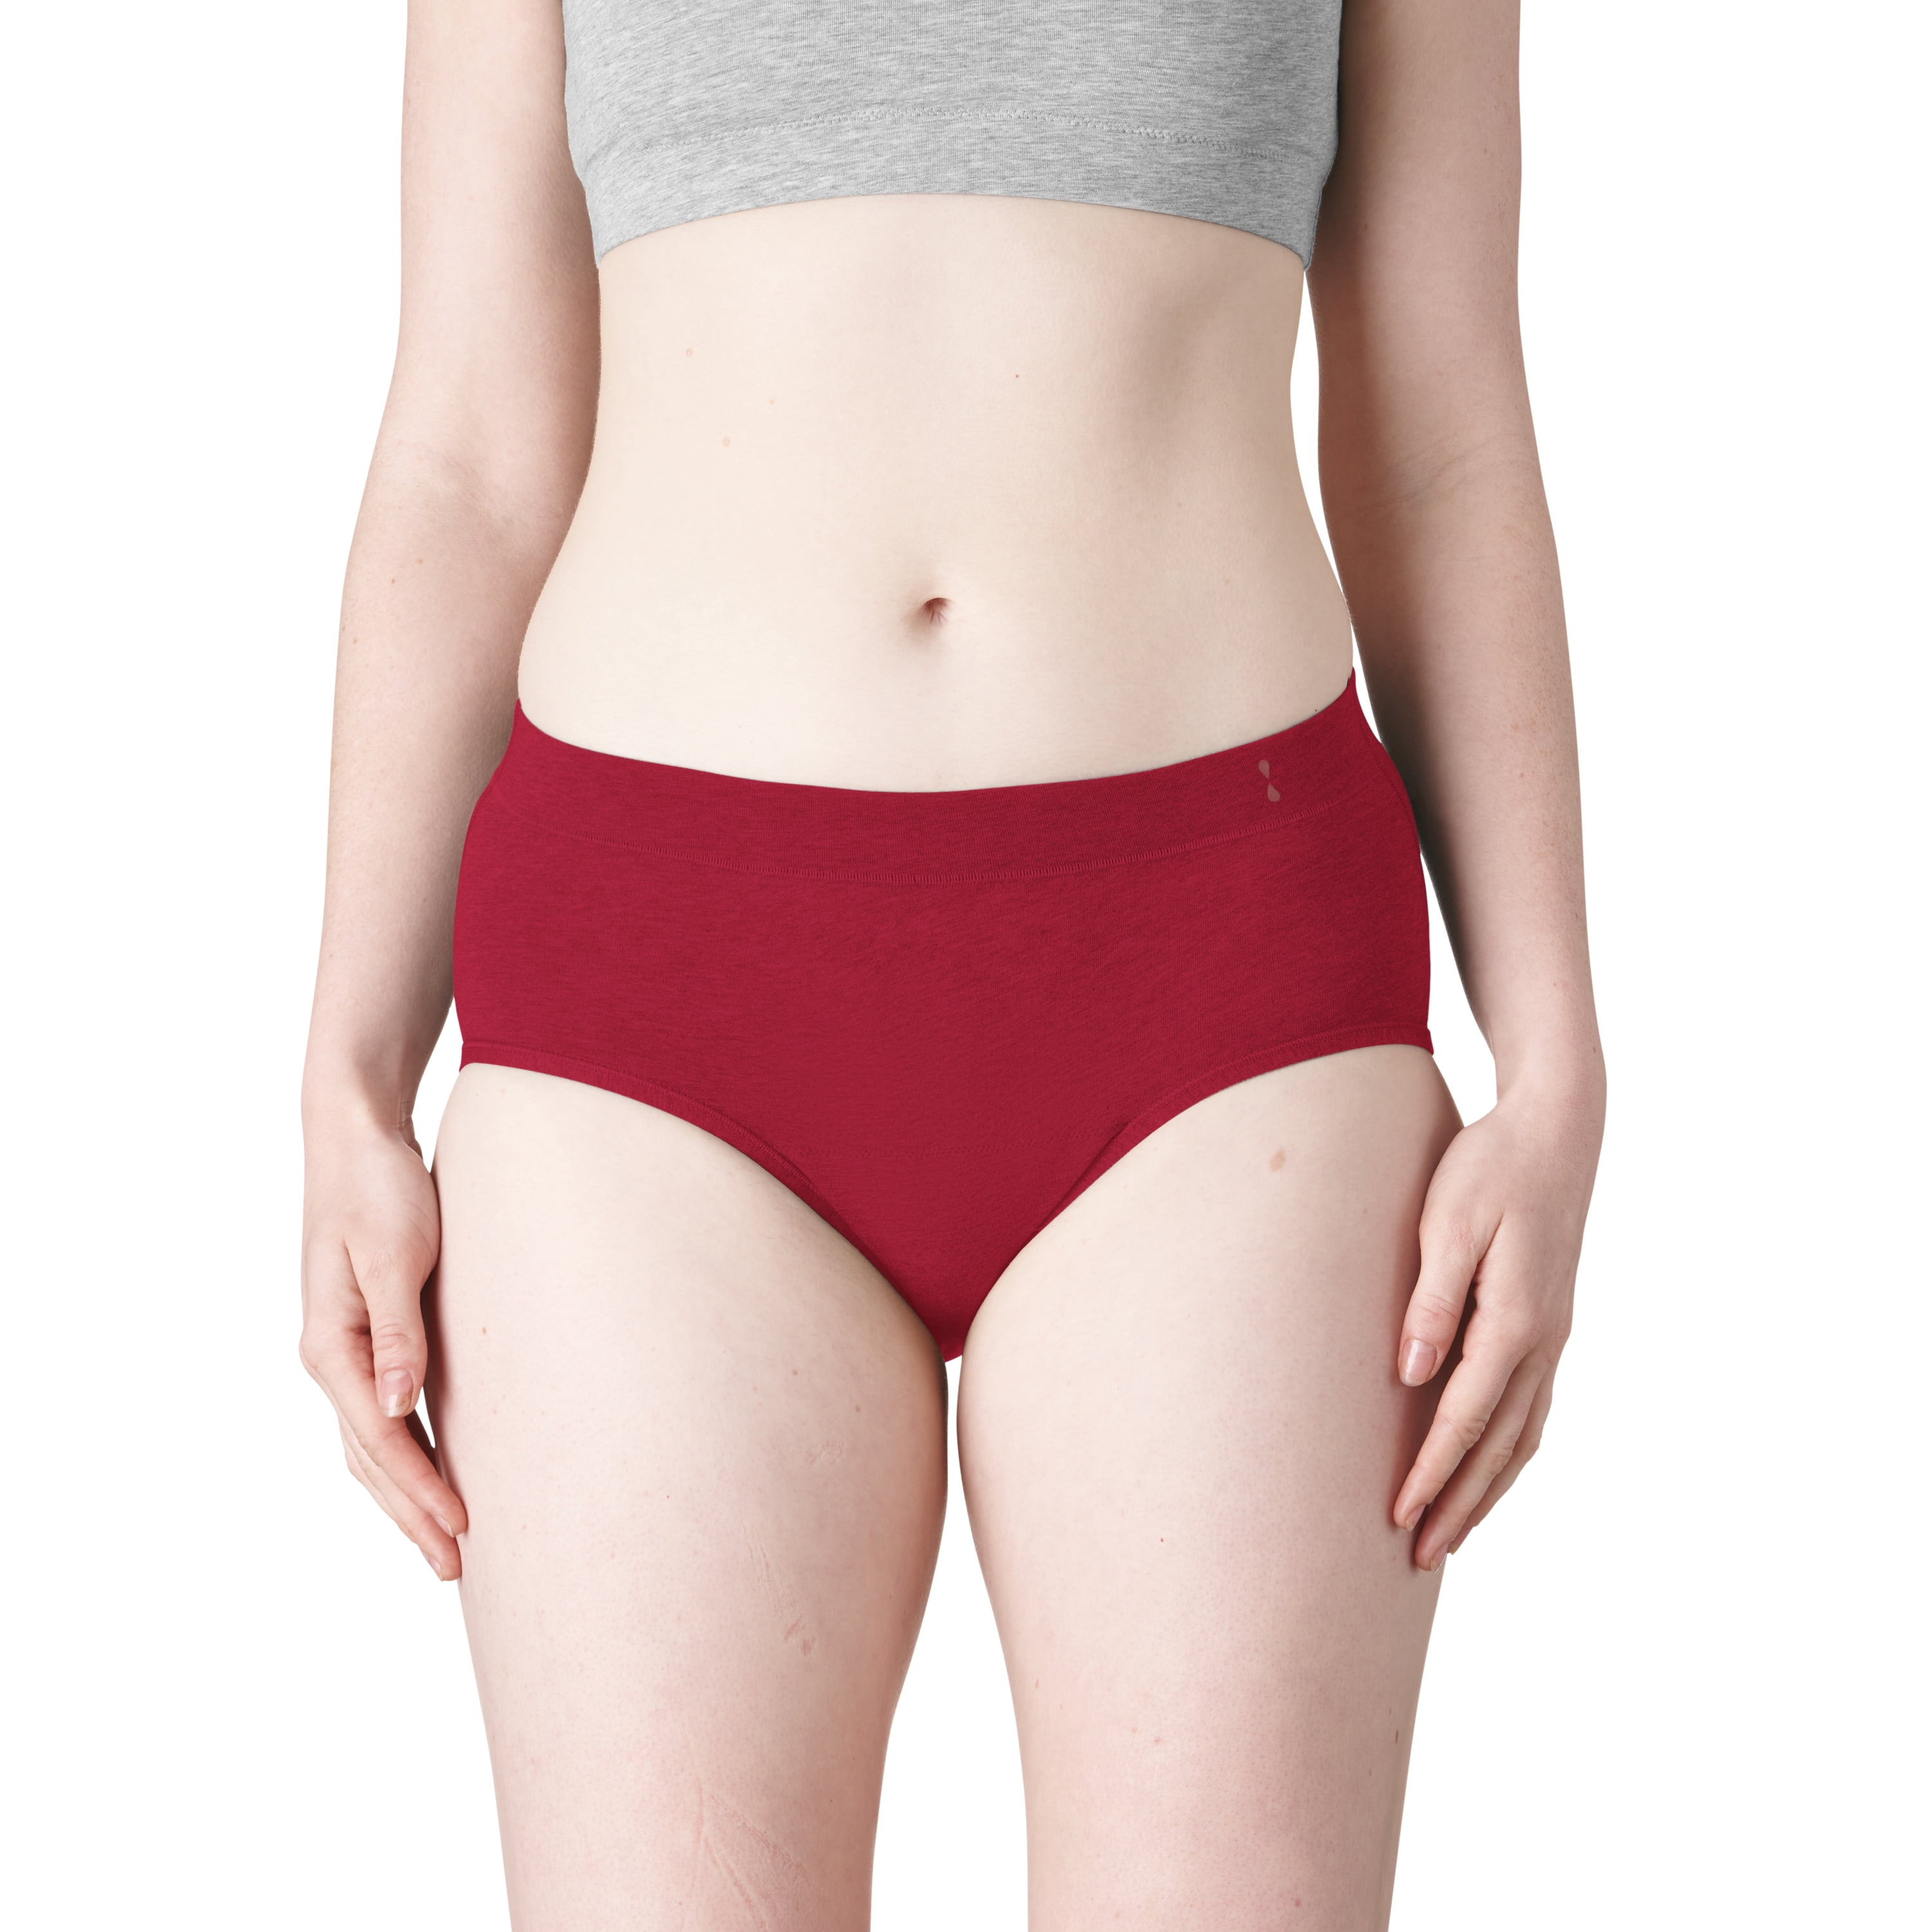 Thinx for All Women's Super Absorbency High-Waist Brief Period Underwear  Shop all Thinx for All - Miazone